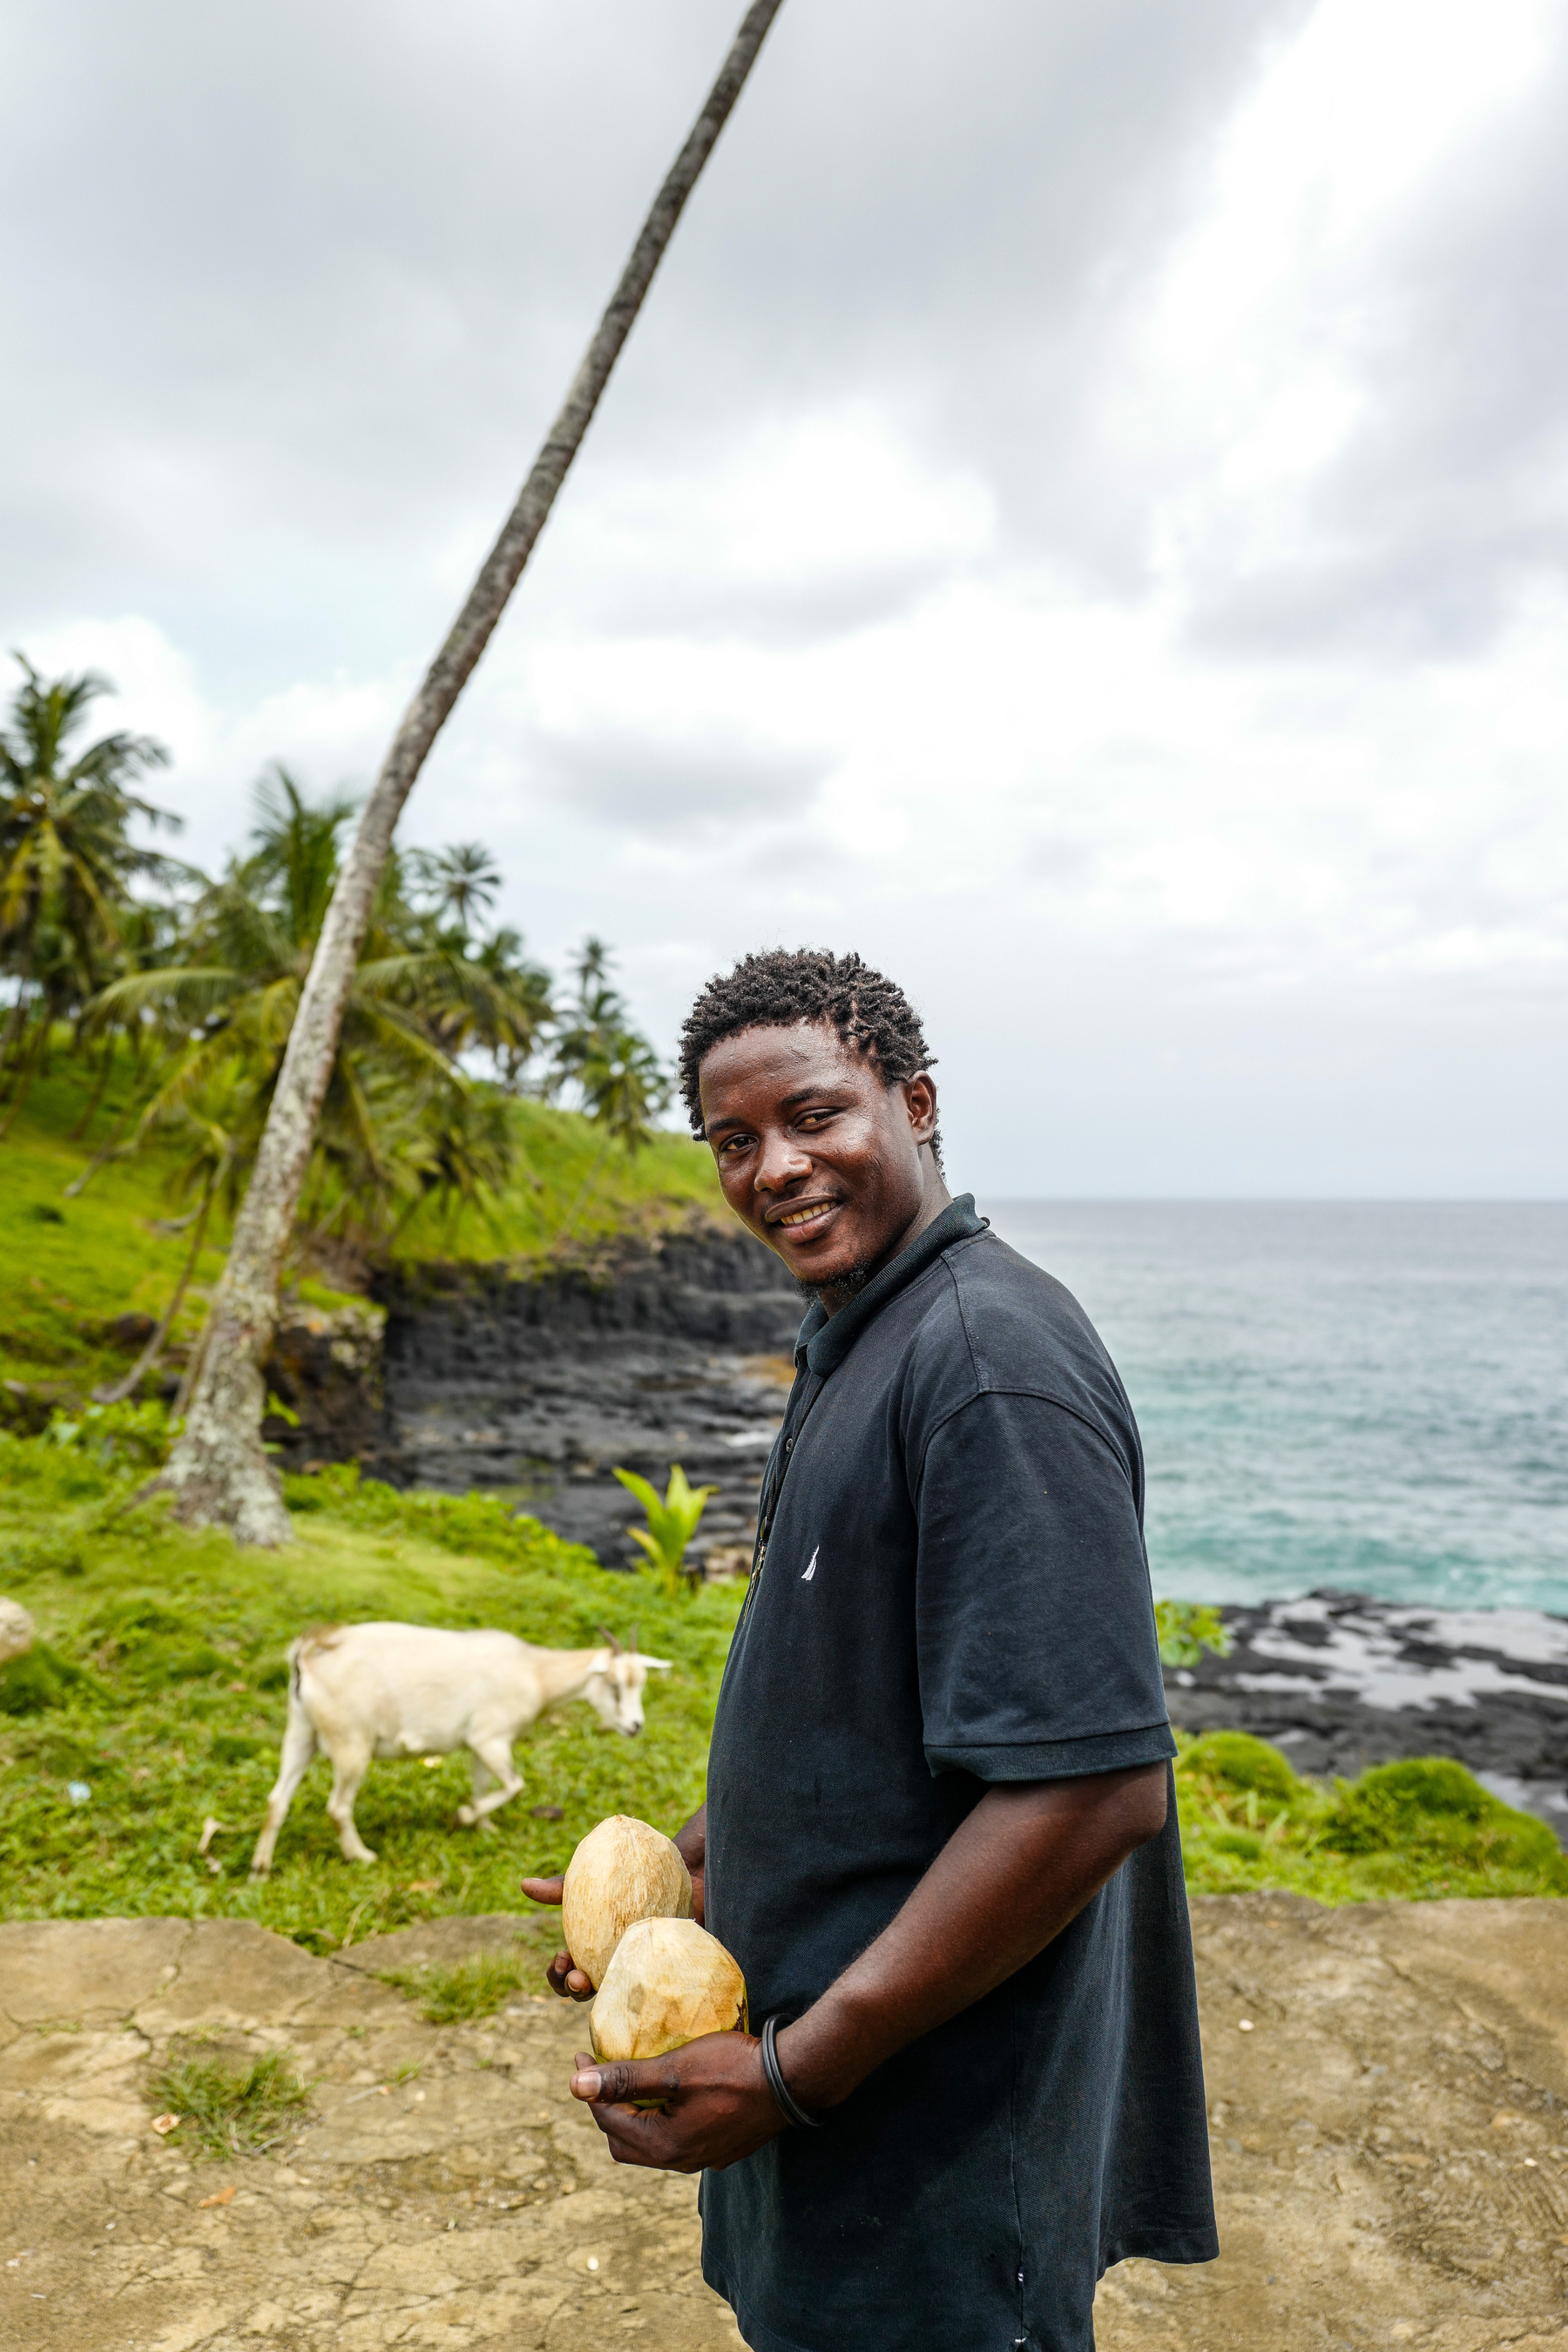 A coconut seller poses with two coconuts, while a goat walks by in the back. 